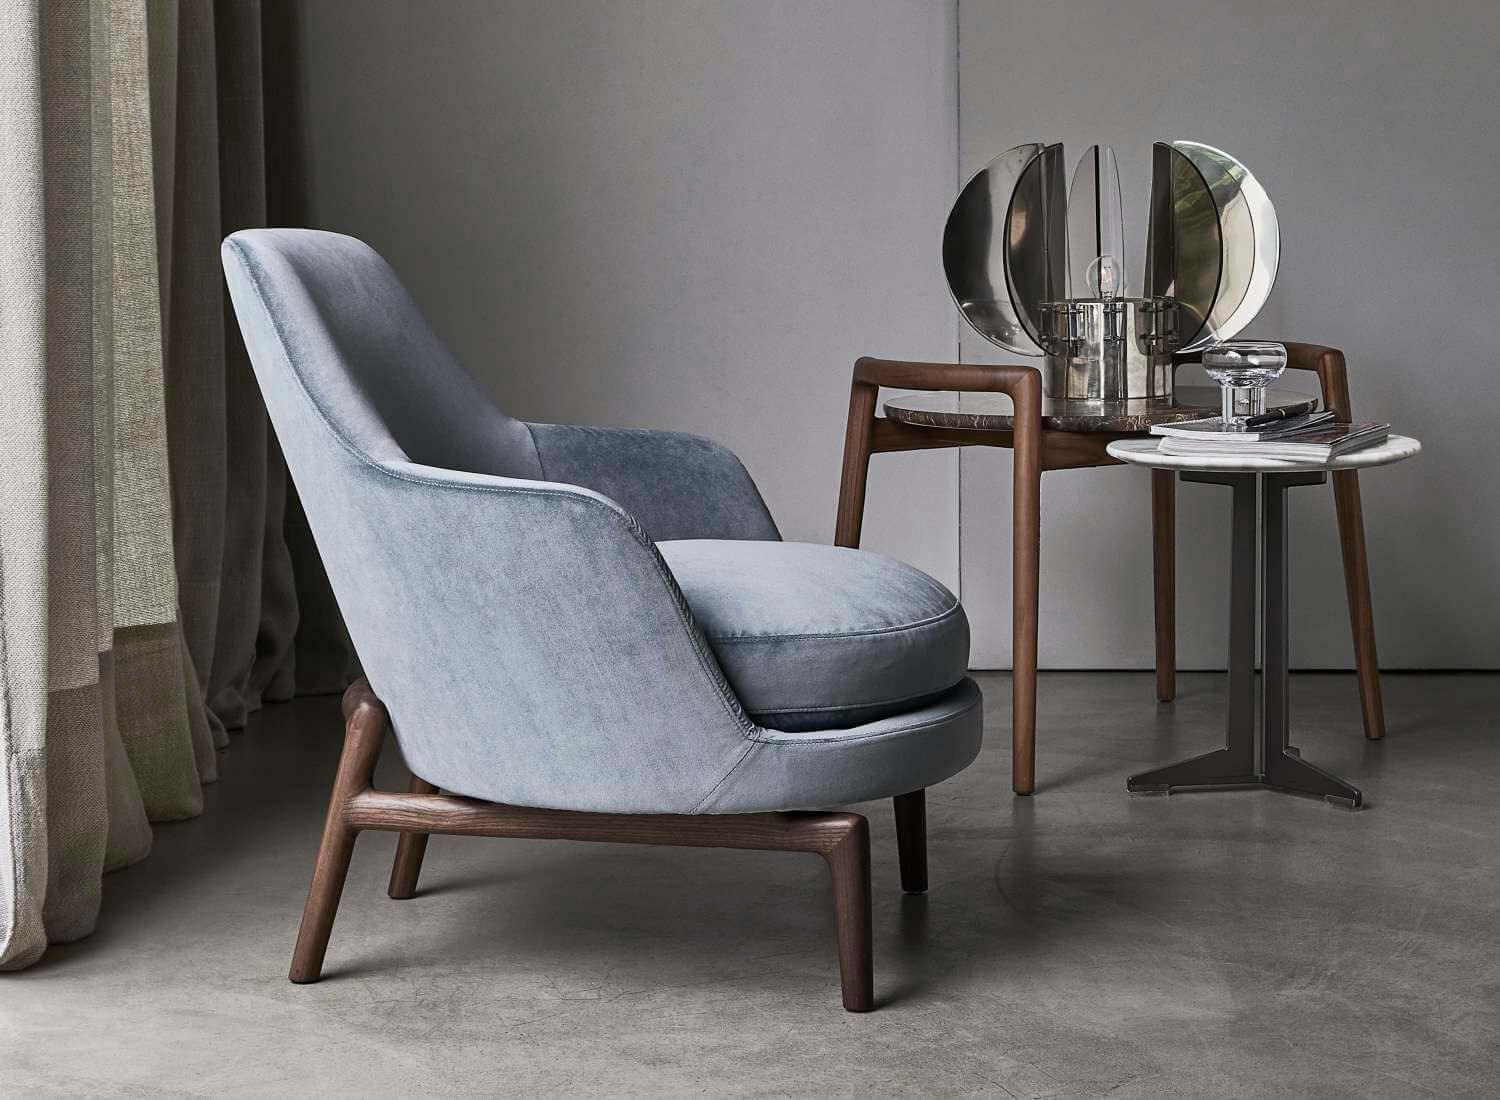 The Leda armchair designed by Antonio Citterio cleverly fuses classic and contemporary lines. The wood base is distinguished by a motif that echoes the tradition of Leda Armchair